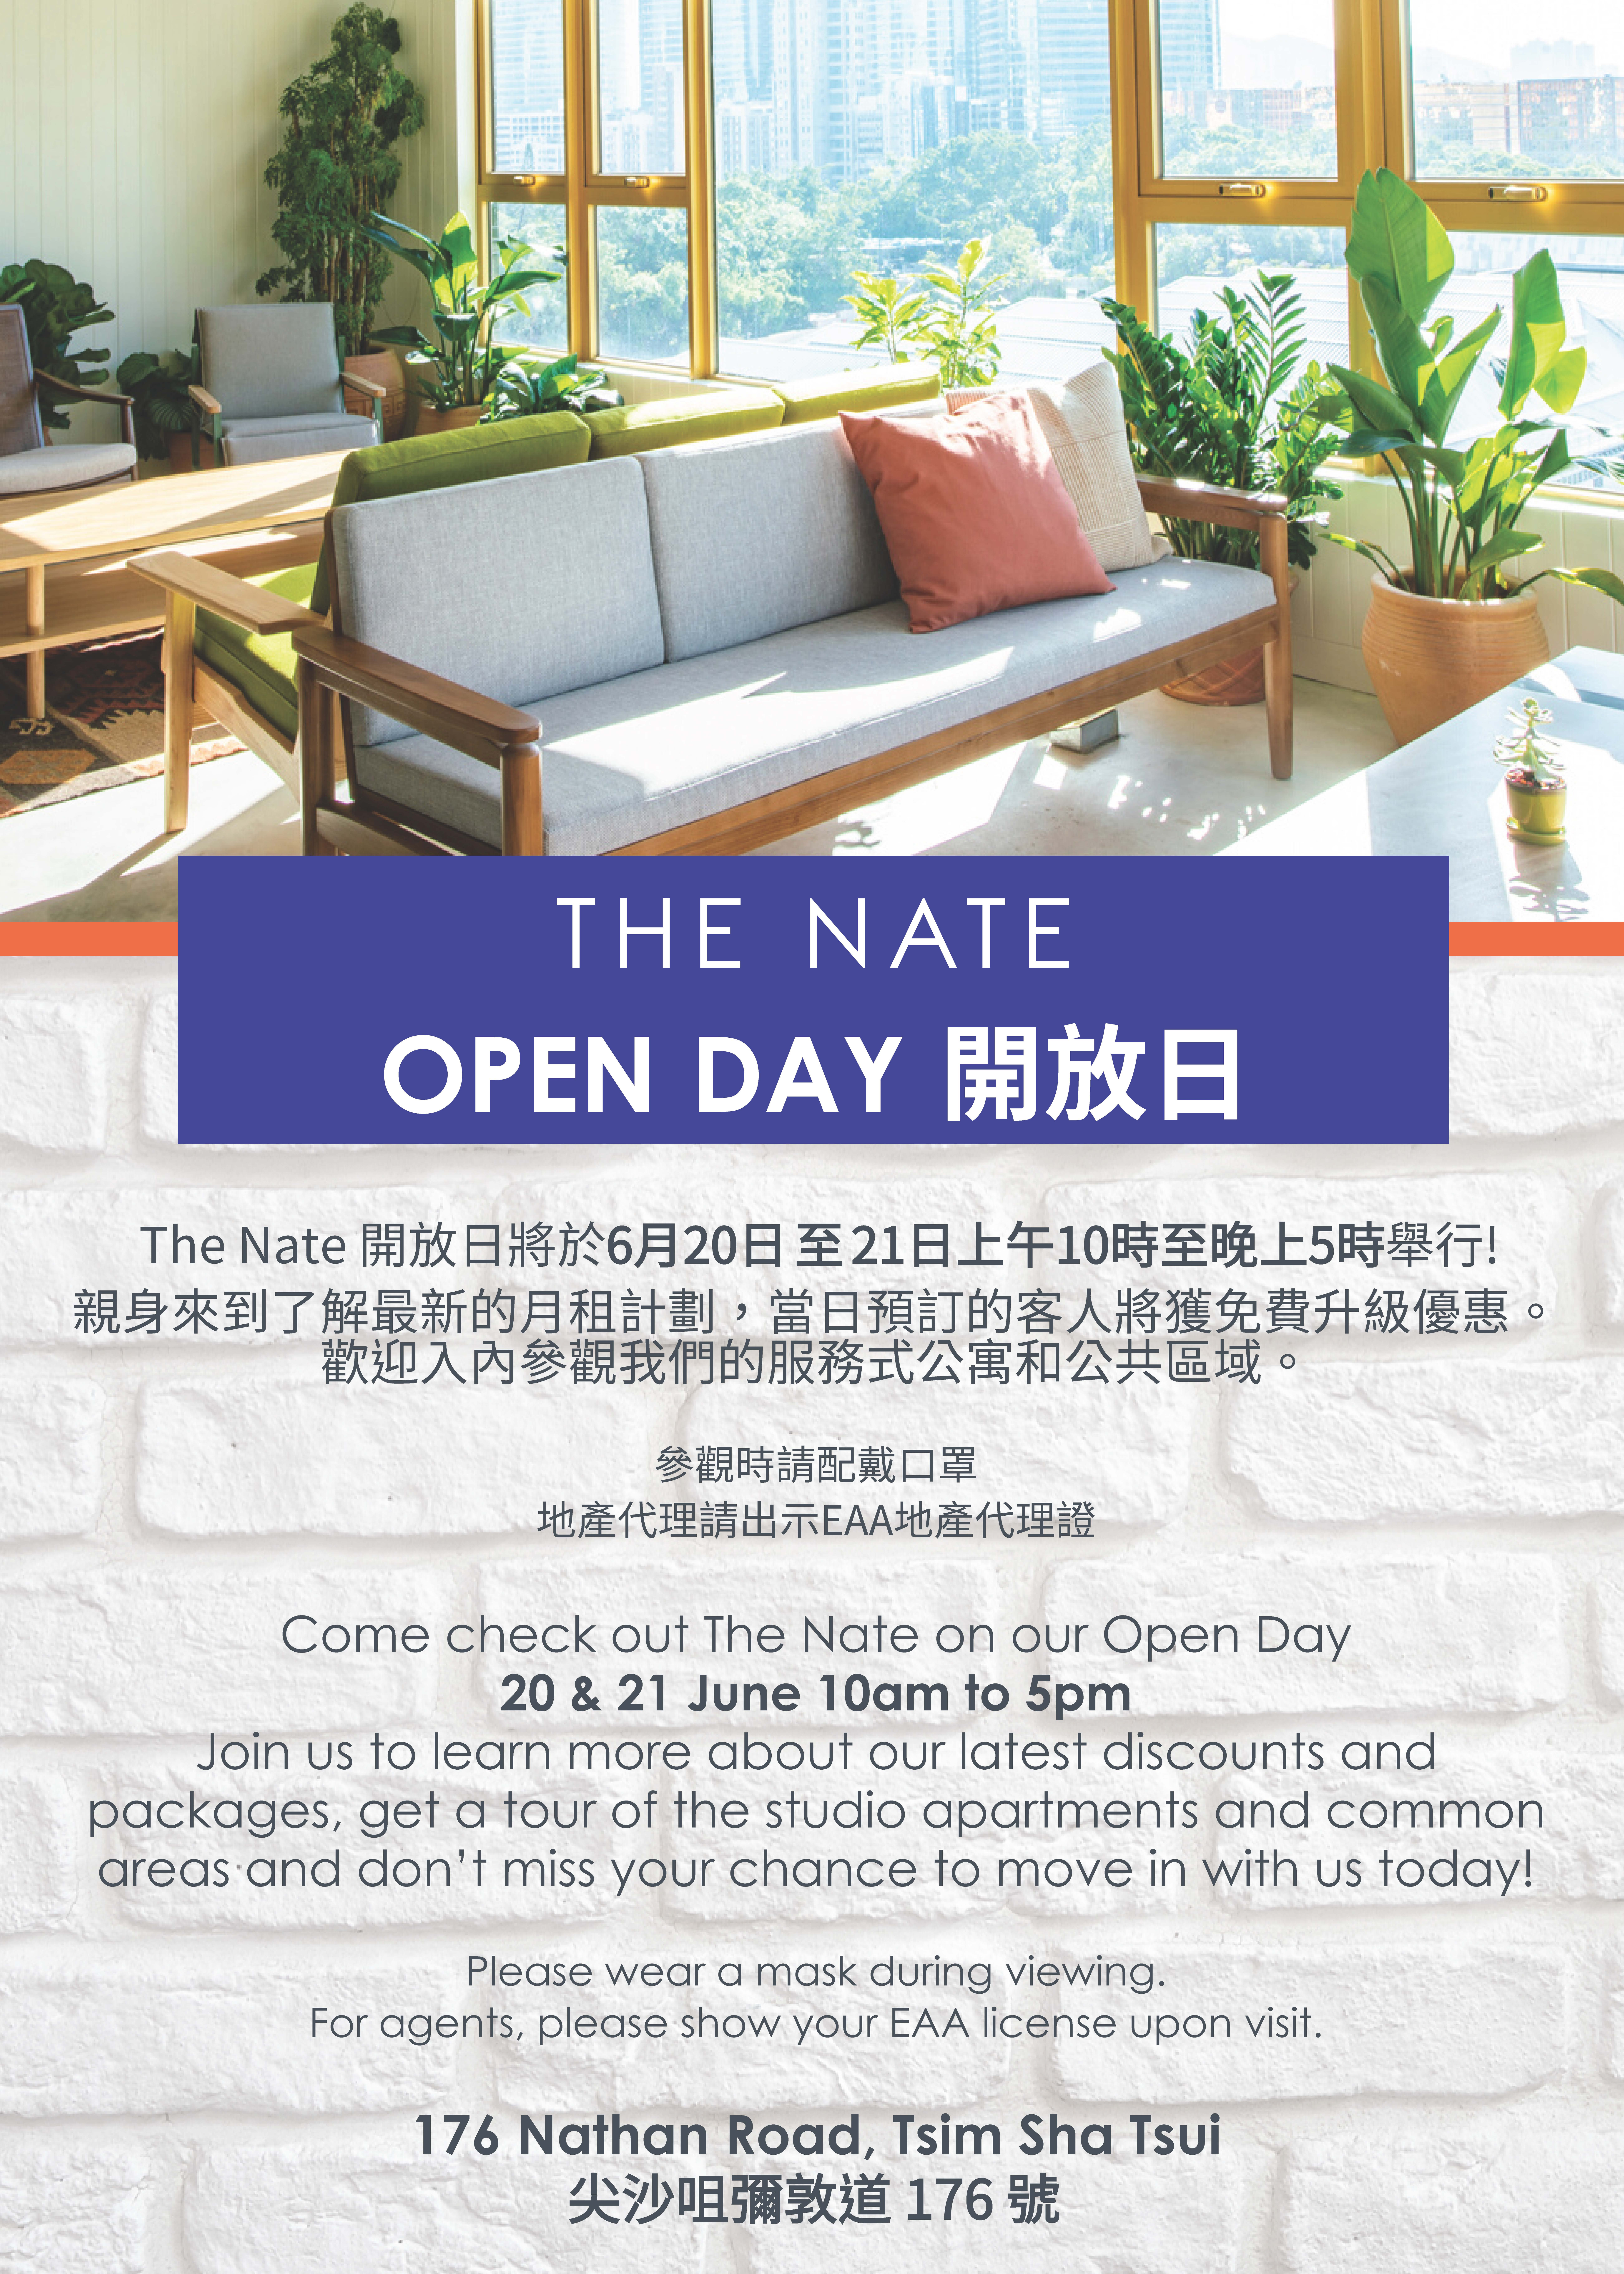 The Nate Open Day 2020